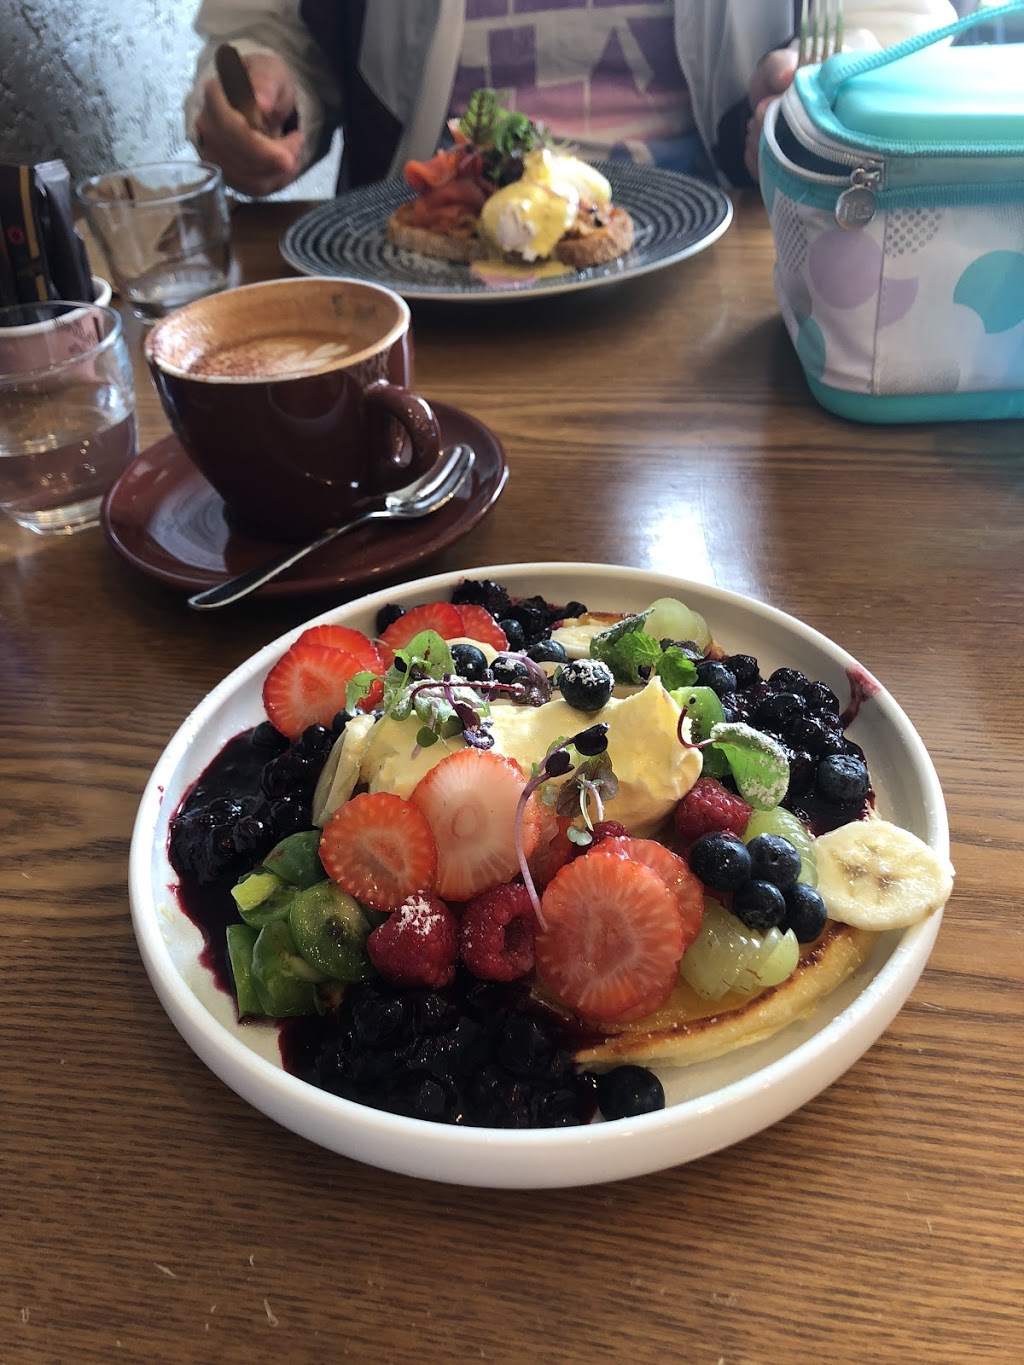 Queens Cup Cafe and Restaurant | 9 Gibbons St, Oatlands NSW 2117, Australia | Phone: 0416 234 667